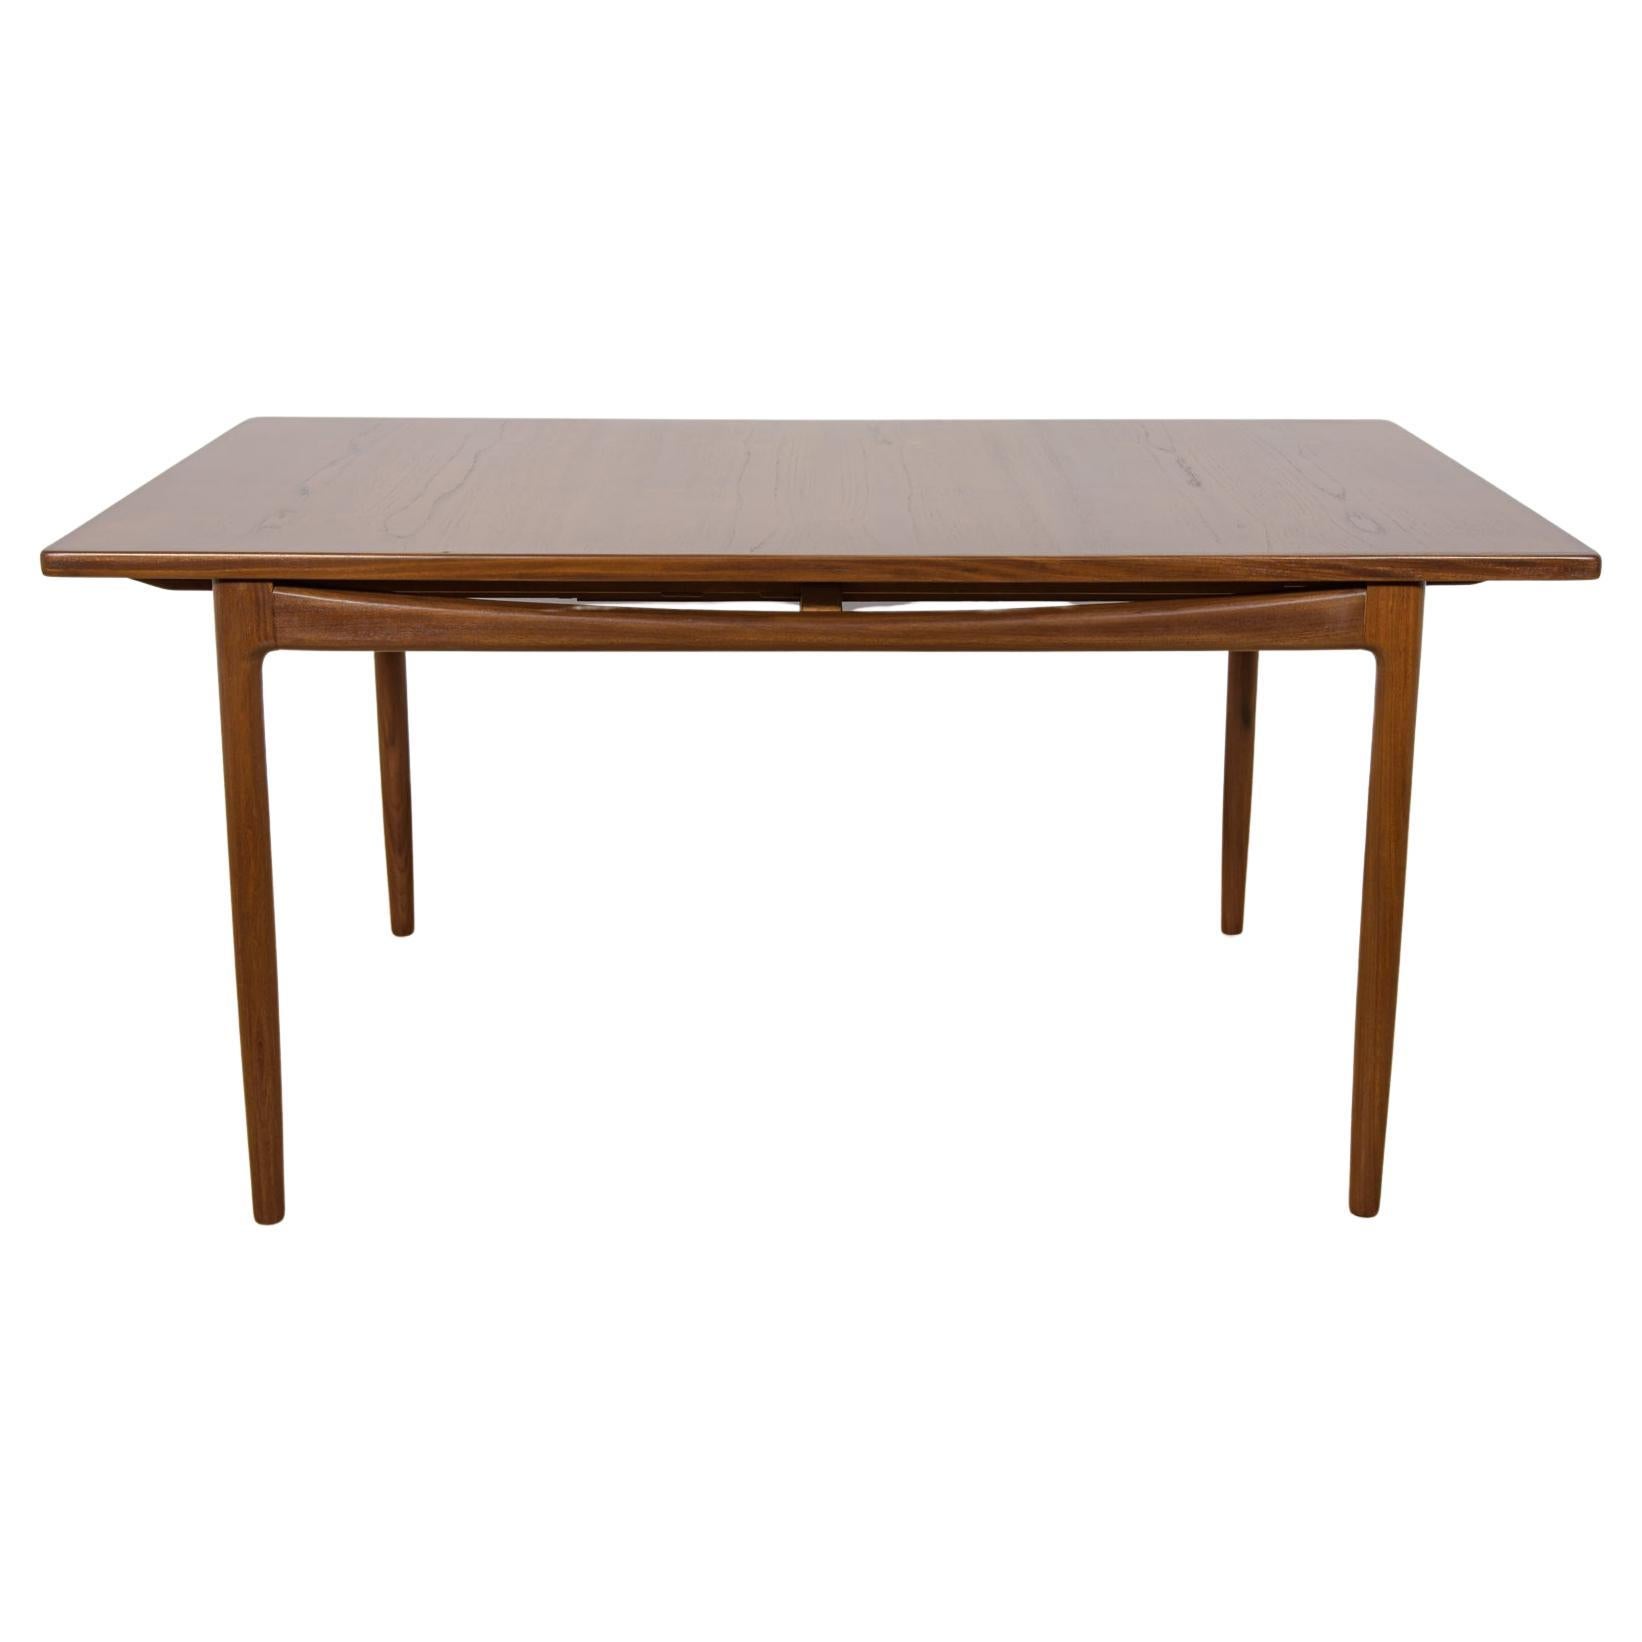 Mid-Century Dining Table by Ib Kofod Larsen for G-Plan, 1960s